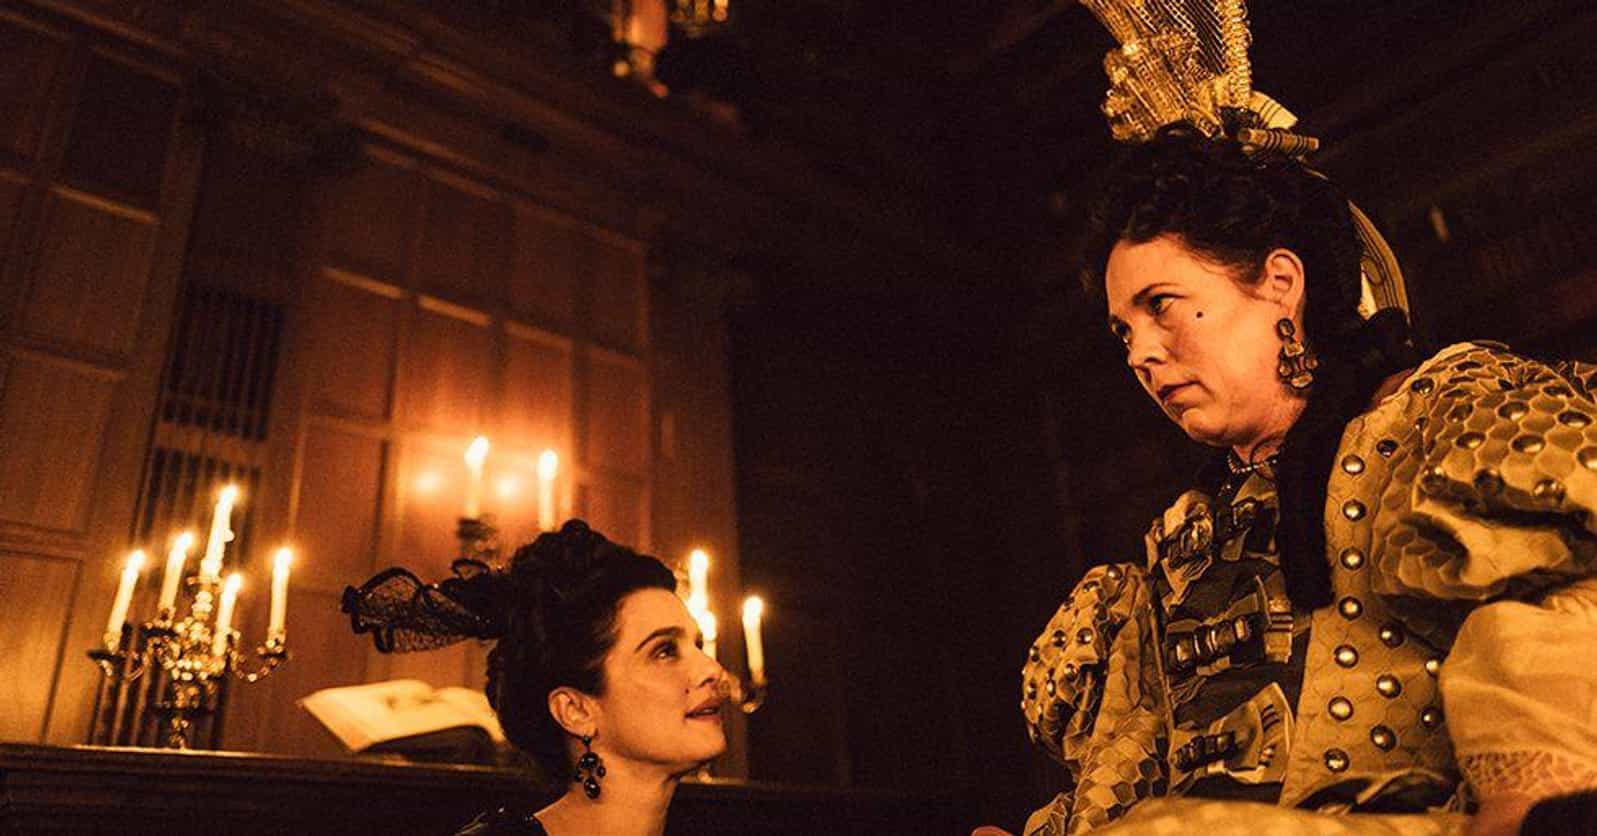 Queen Anne’s Ex-Friend Wrote A Biased Memoir That Tarnished Her Reputation For Centuries